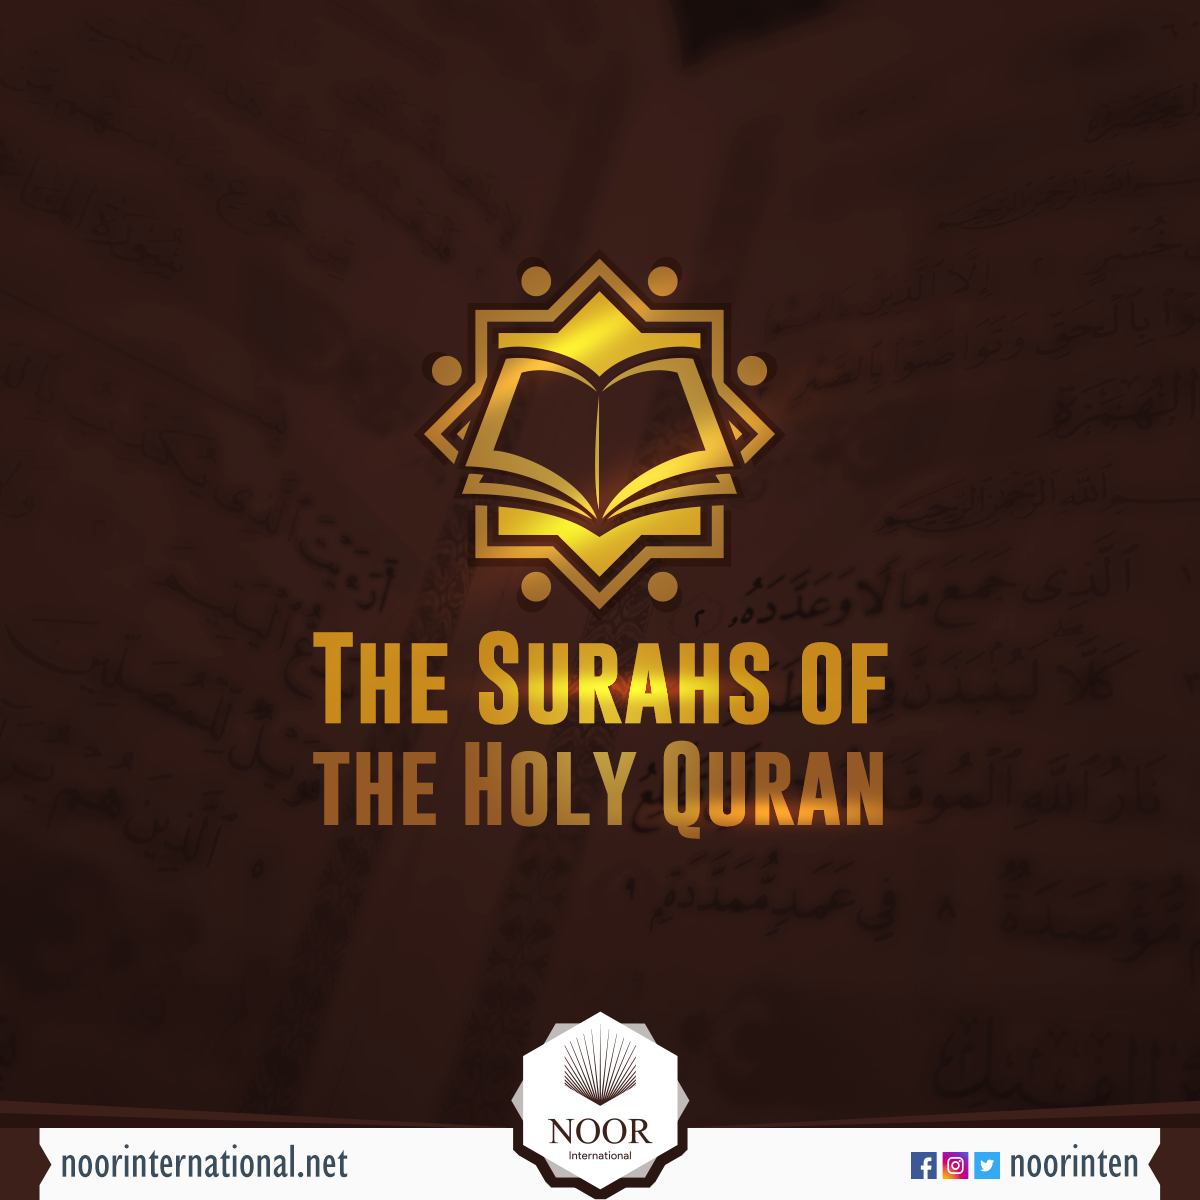 What do you know about the Qur’an? for Non-Muslims